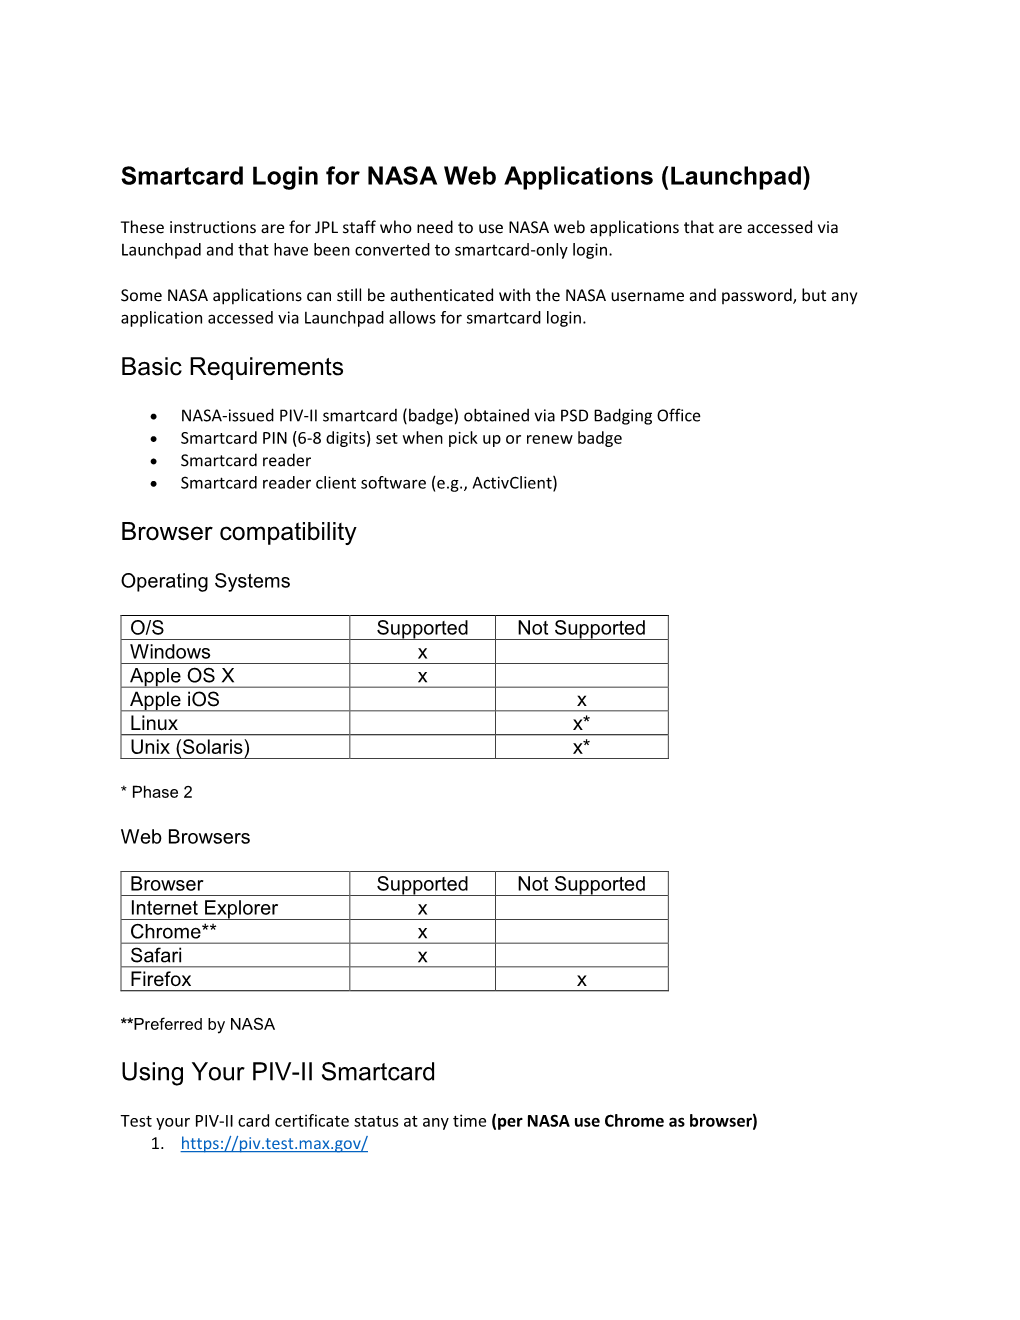 Smartcard Login for NASA Web Applications (Launchpad) Basic Requirements Browser Compatibility Using Your PIV-II Smartcard